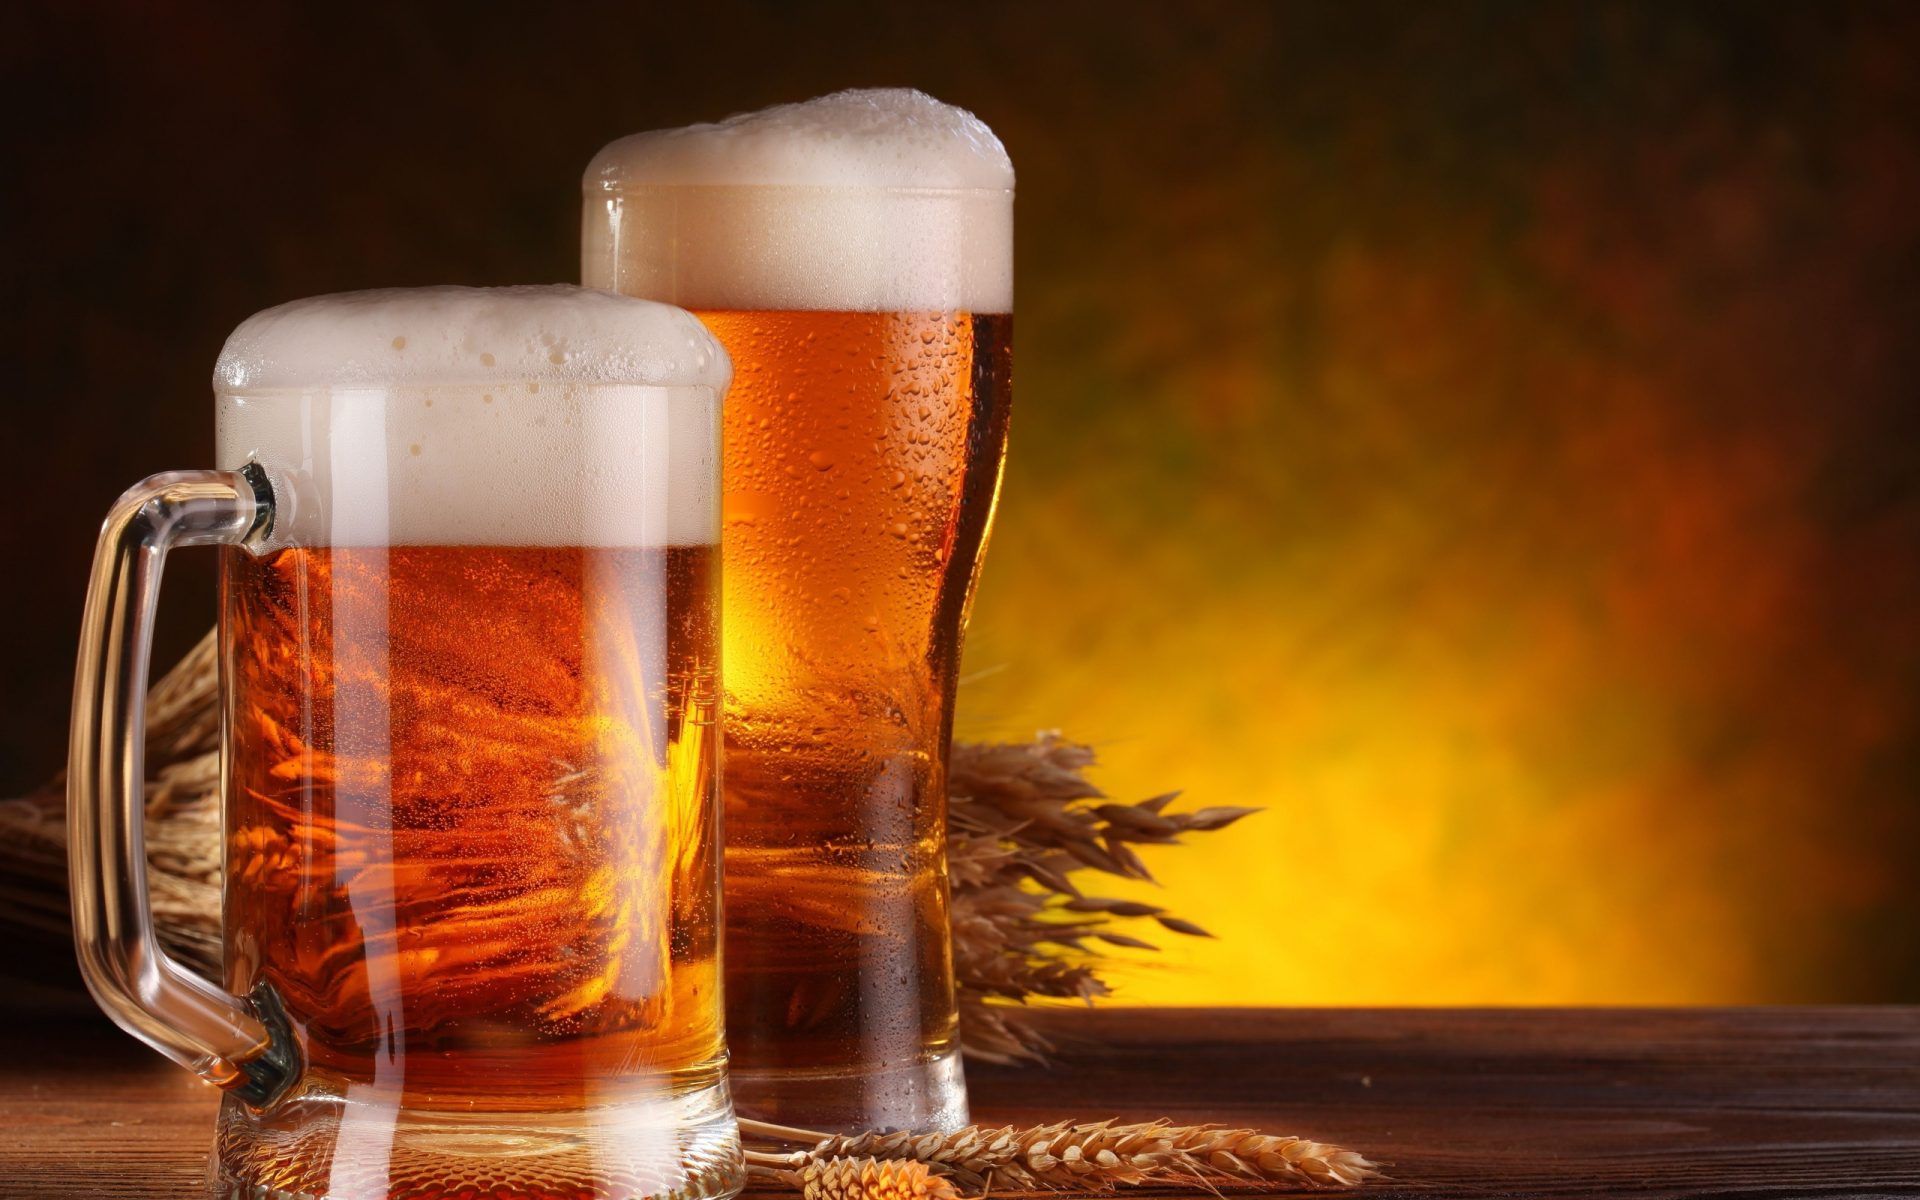 Alcoholic beverage development based on starchy materials